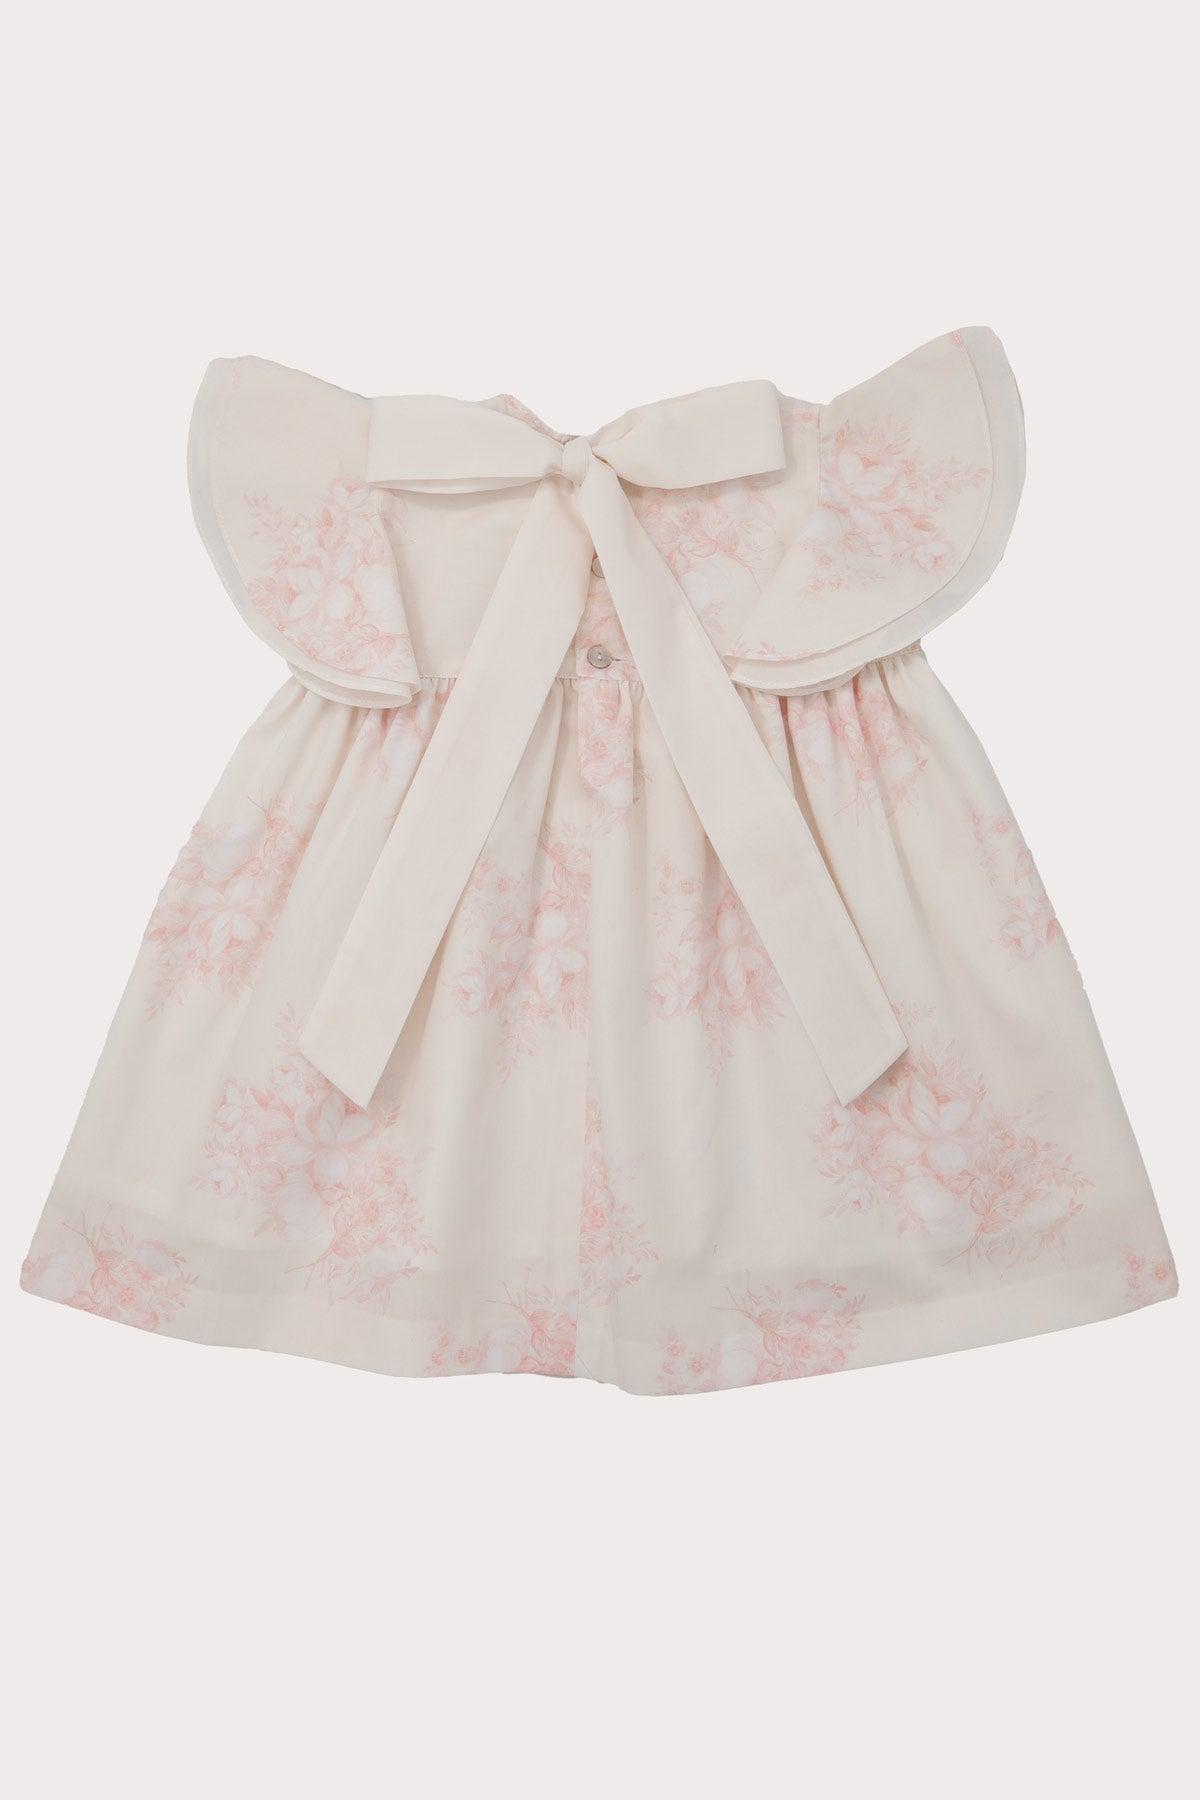 ivory and pink floral girls dress